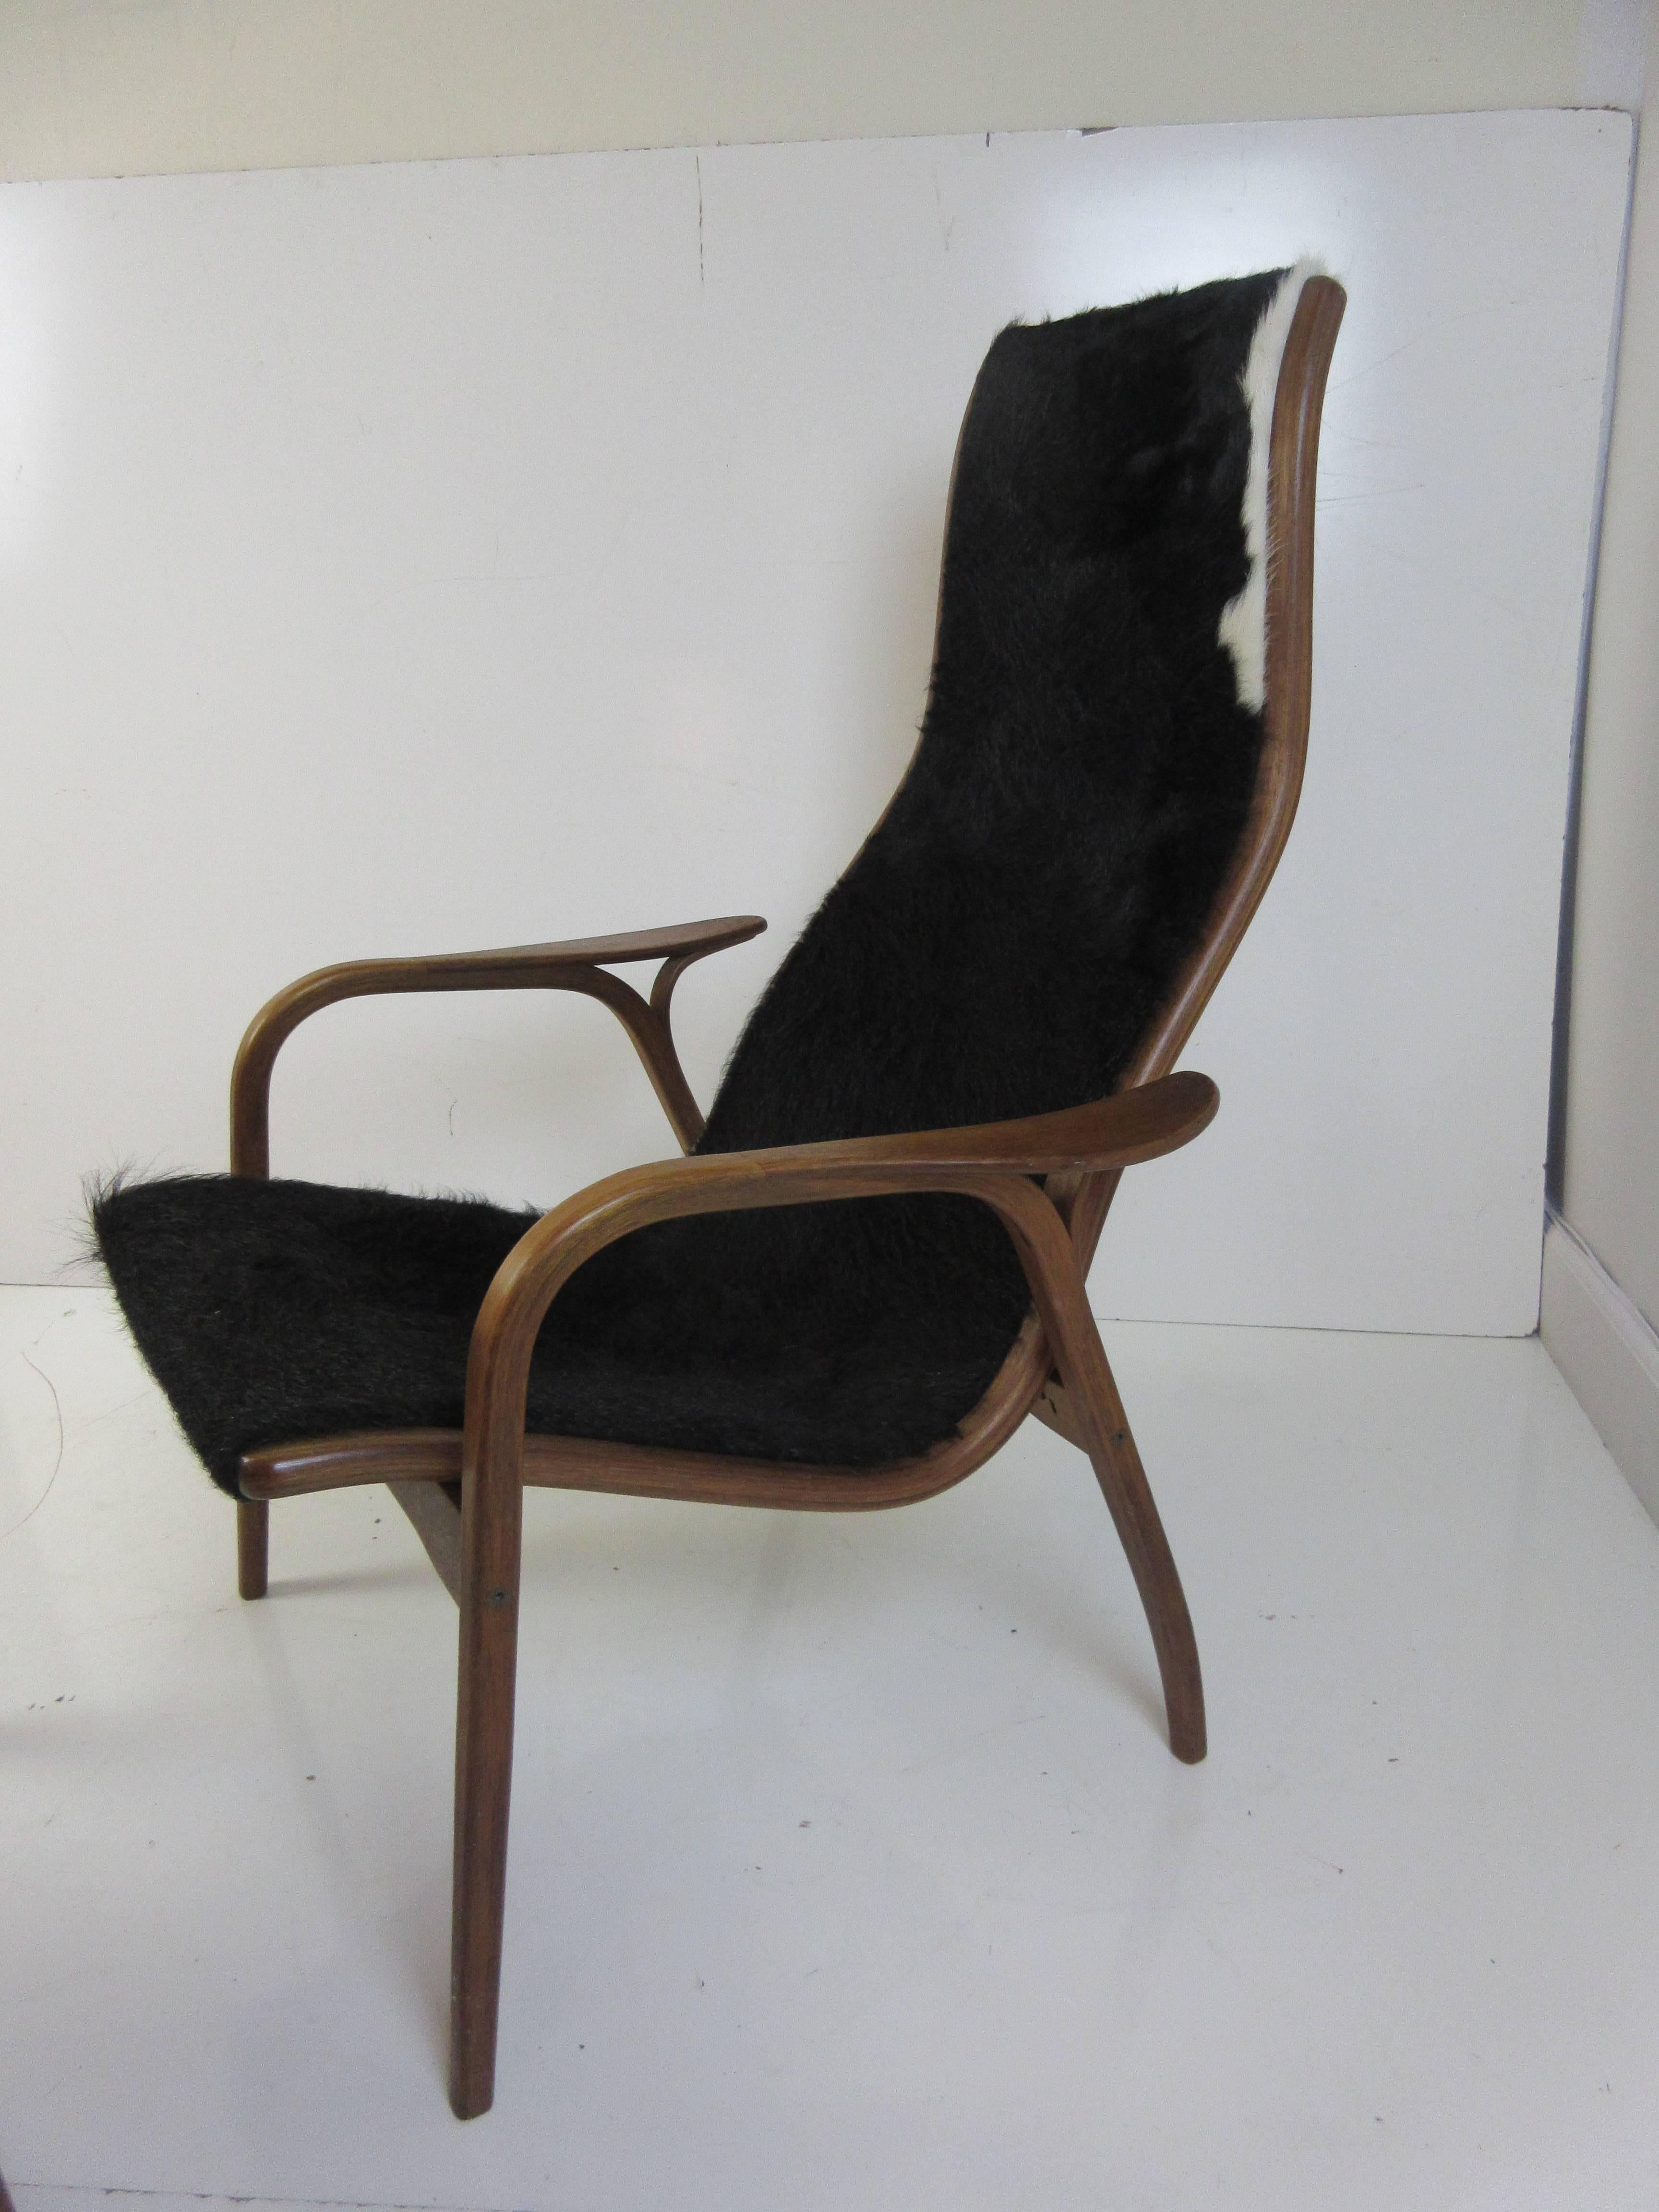 Yngve Ekstrom Lamino chair and Ottoman by Swedese in cow hide with bent laminated teak frame. Cow hide is mostly black with just slivers of white. Chair has burnt in label.